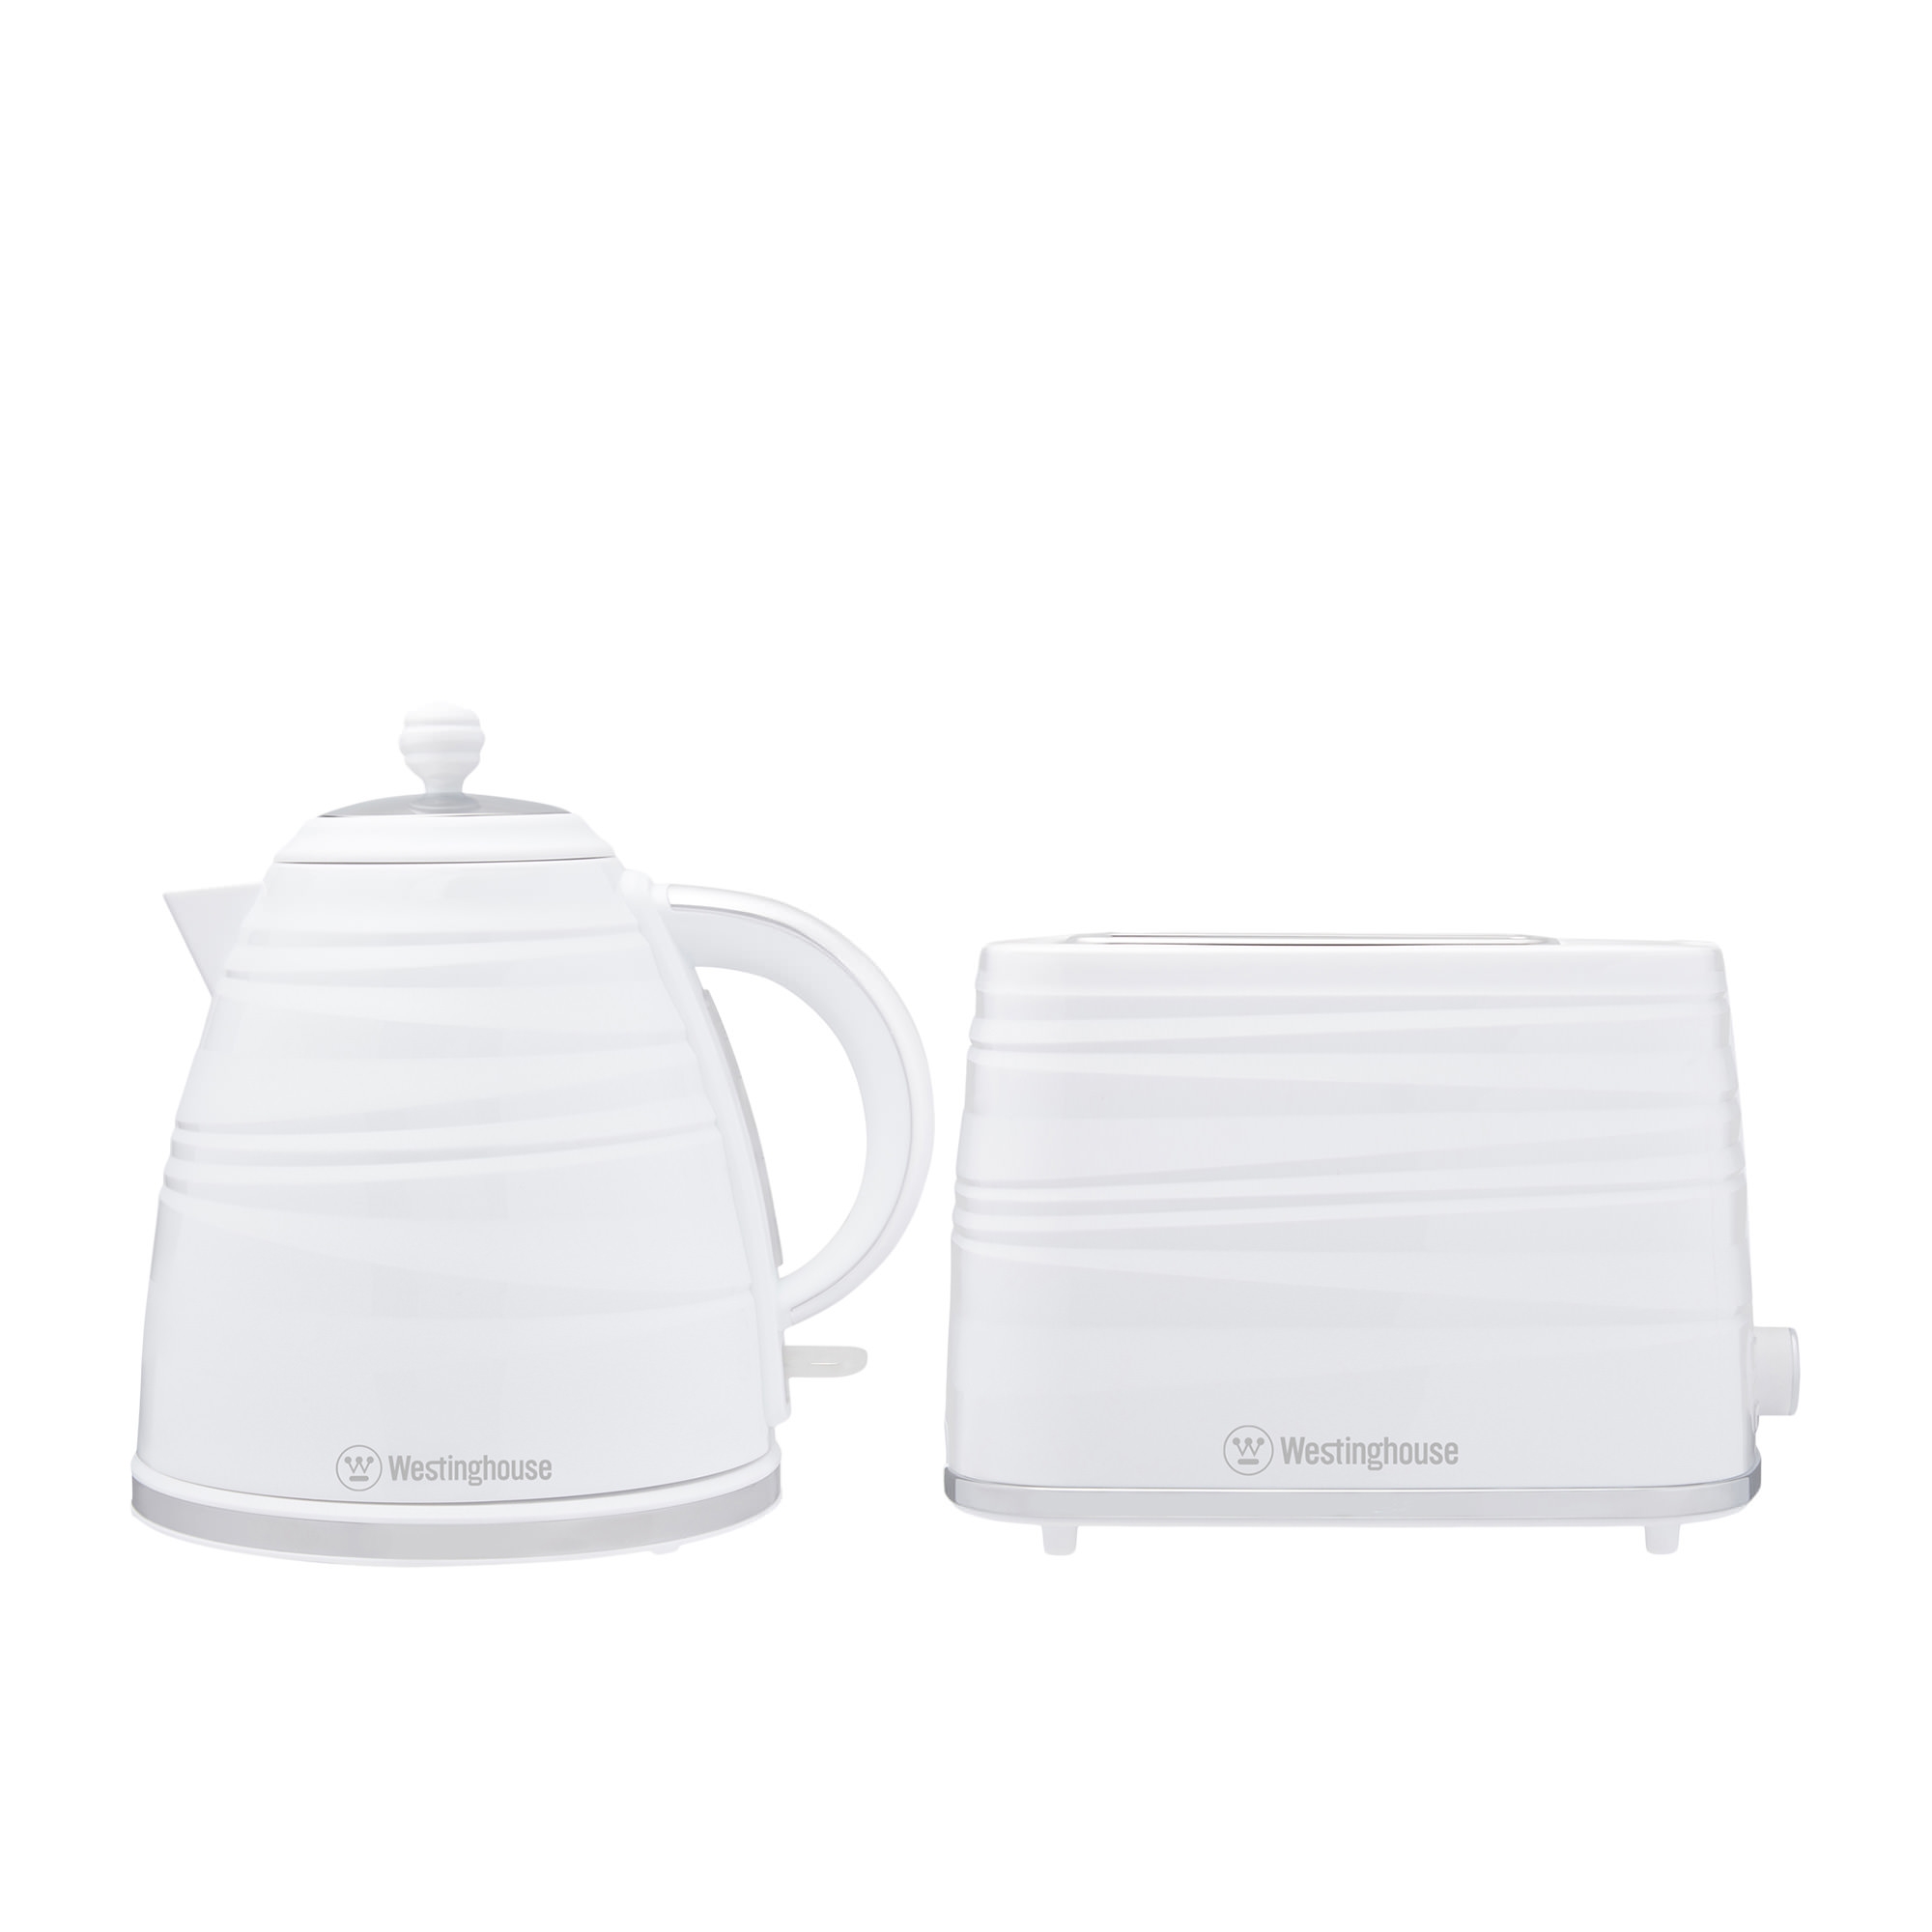 Westinghouse Kettle and Toaster Pack White Image 1